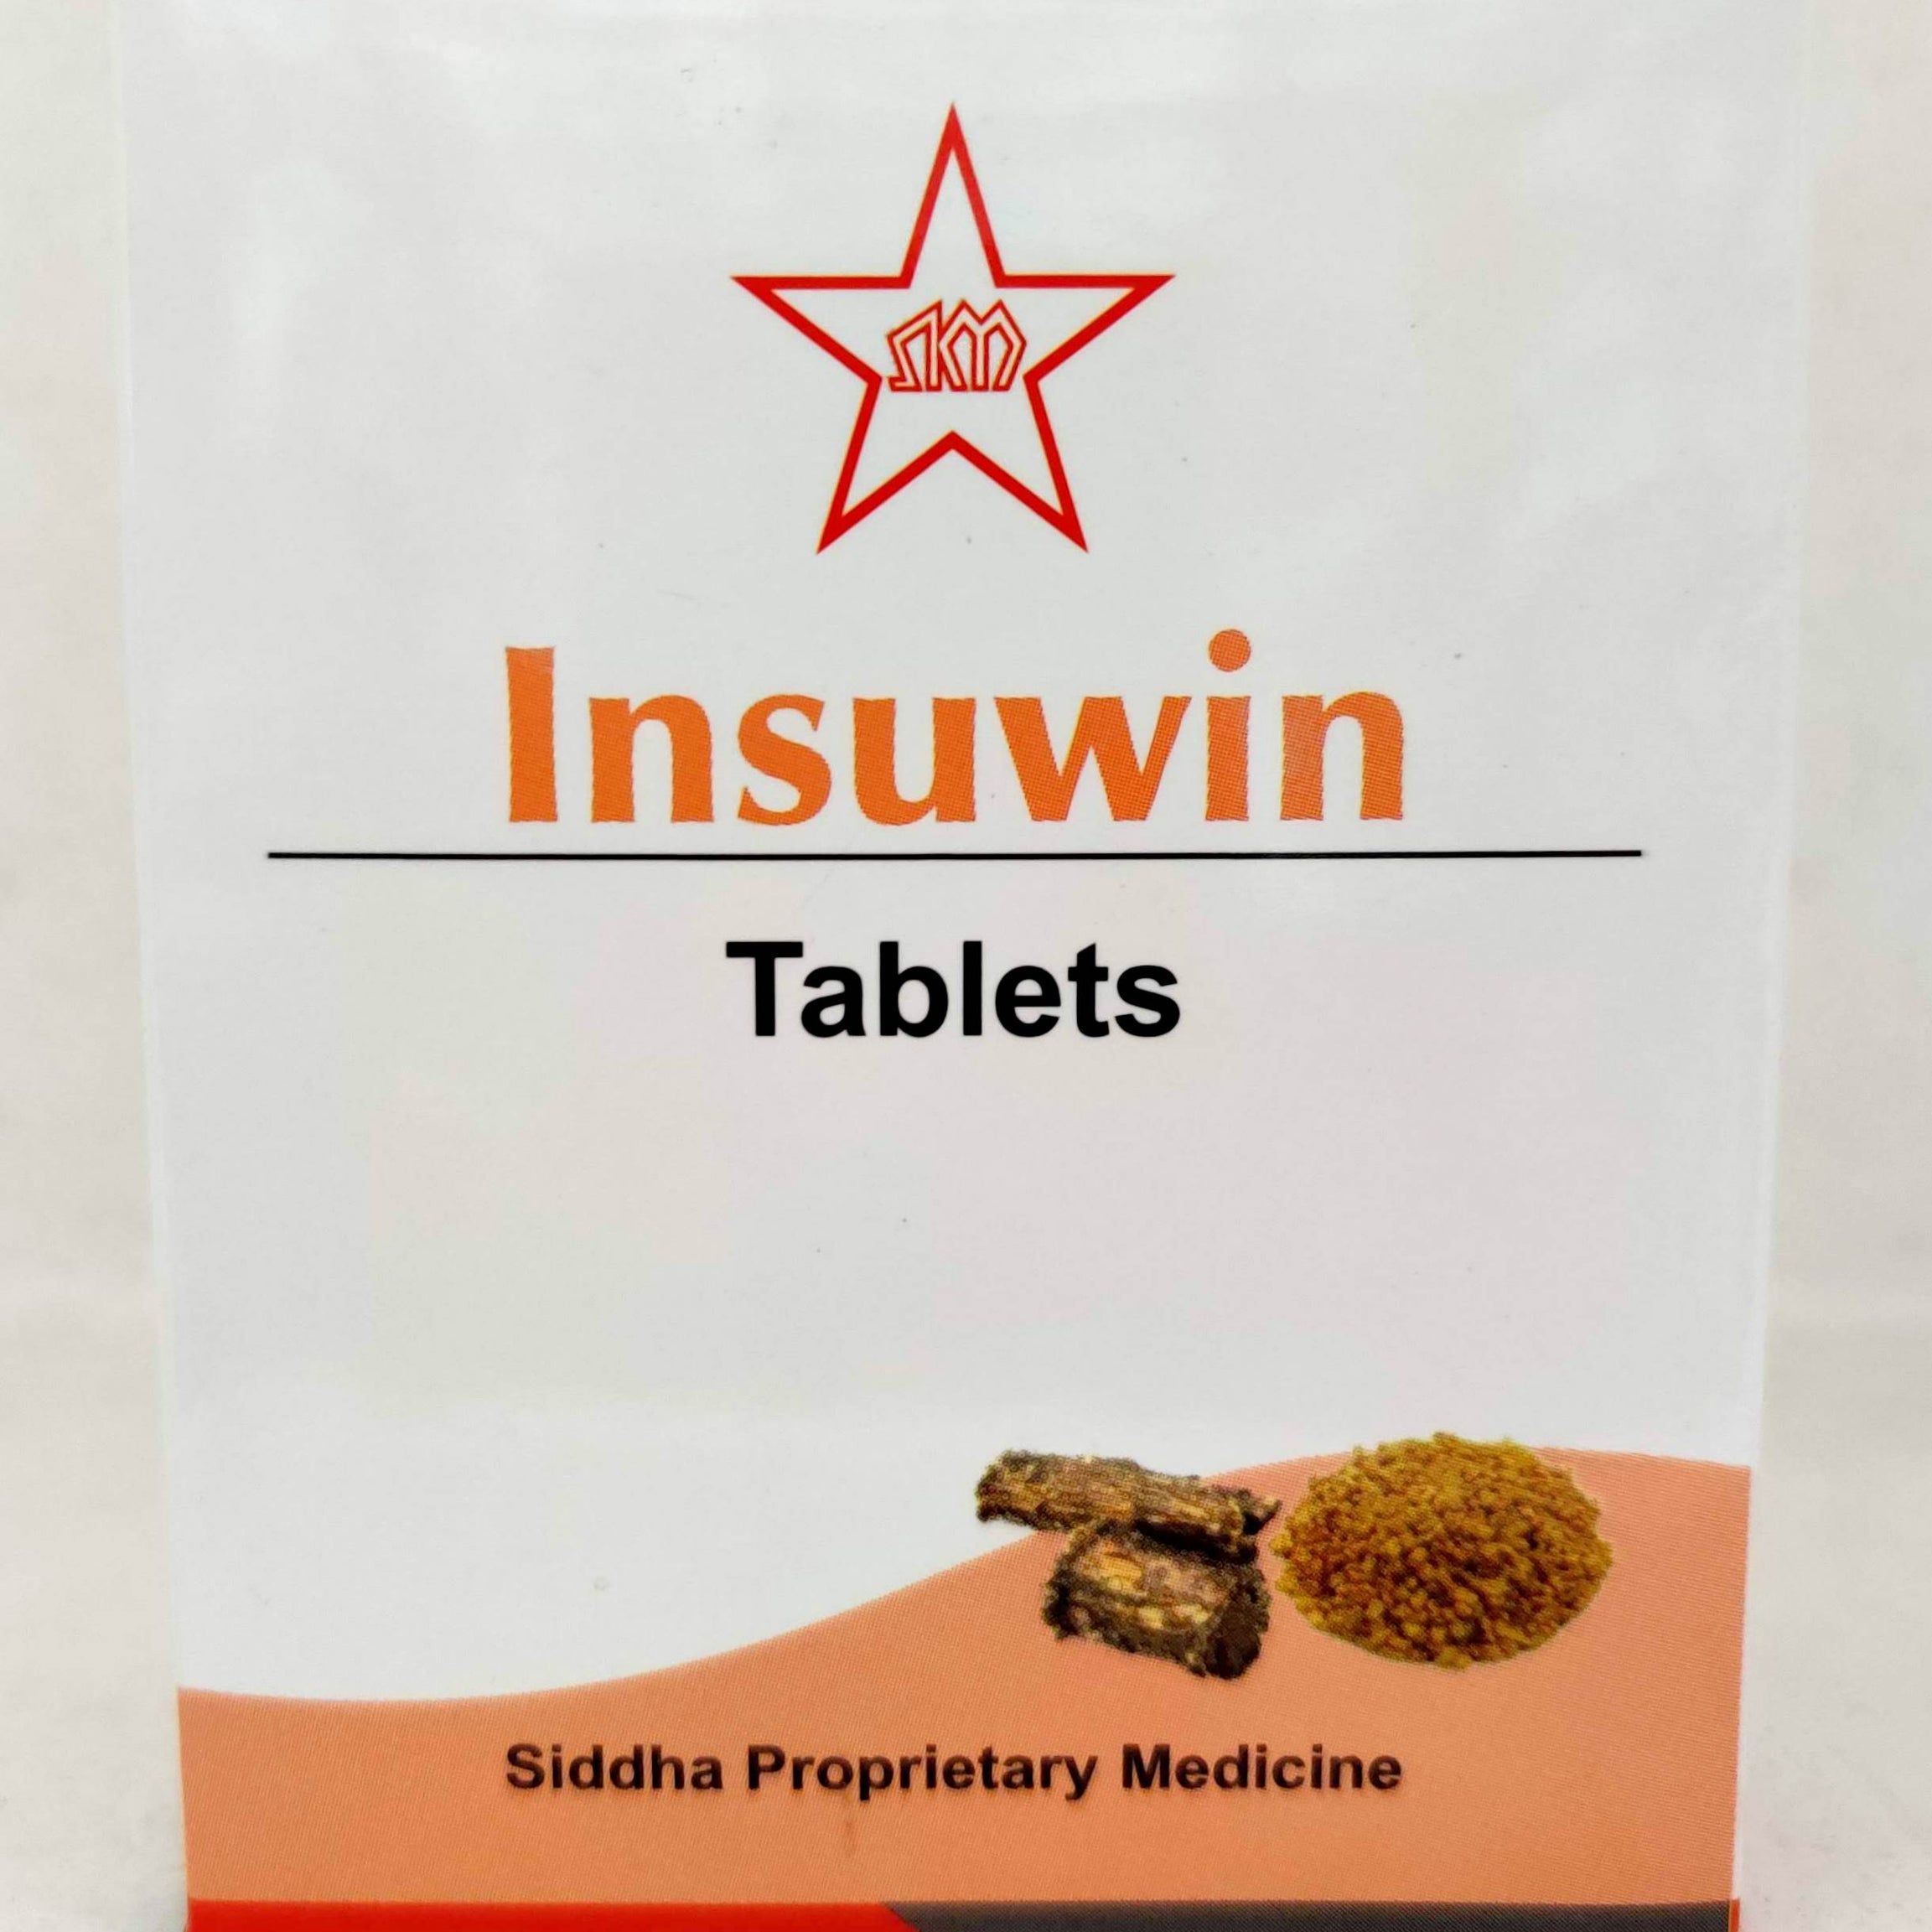 Shop SKM Insuwin 10Tablets at price 28.50 from SKM Online - Ayush Care